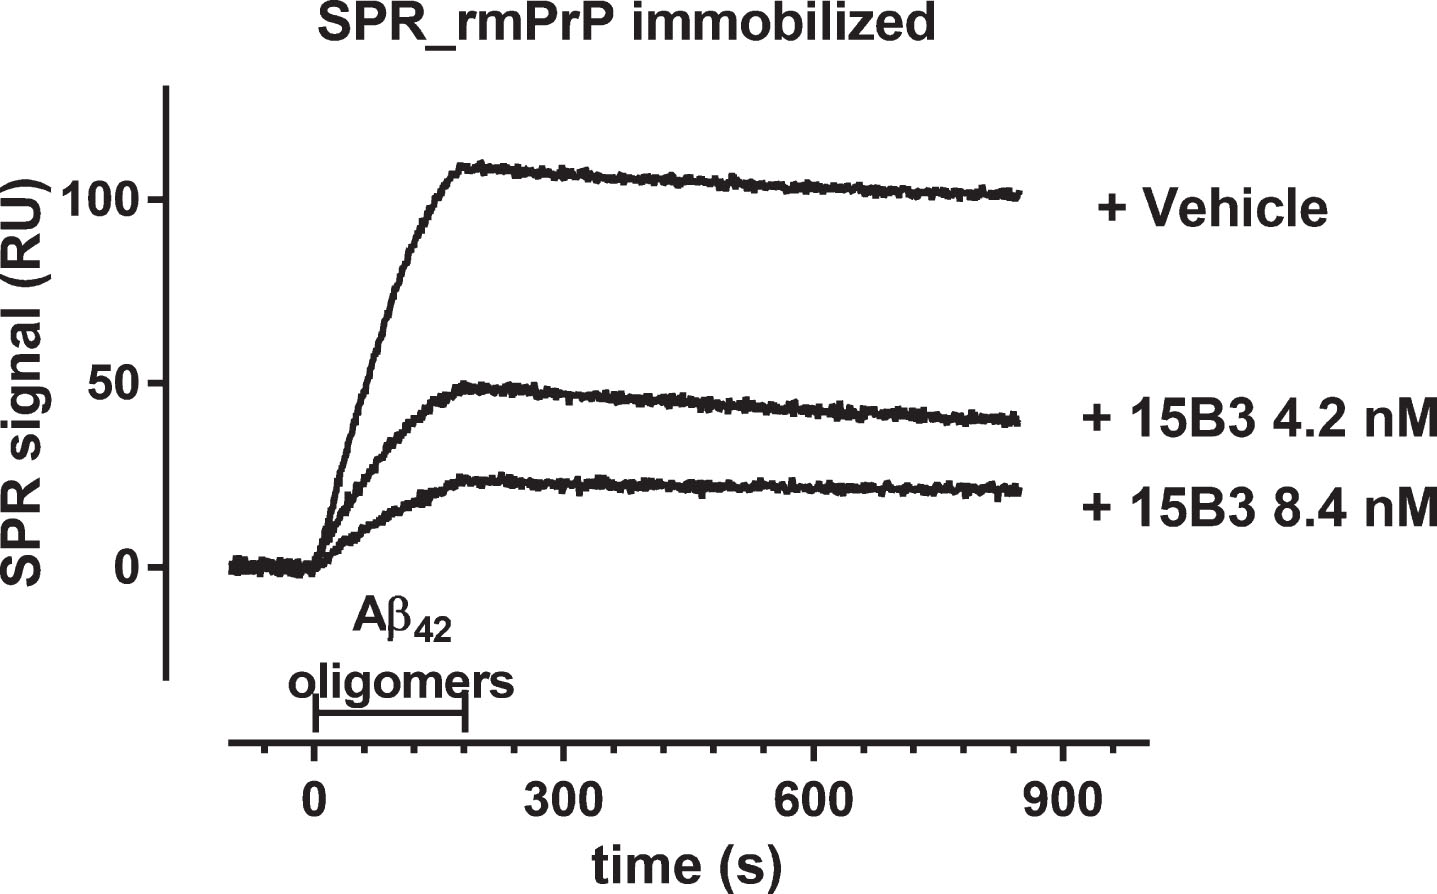 Effect of 15B3 on the binding of Aβ42 oligomers to recombinant mouse PrP (rmPrP) immobilized on the sensor chip—Synthetic Aβ42 (100 μM) was incubated at 25°C, sampled after 5 h, diluted to 1 μM in 10 mM PBS, pH 7.4, and incubated for another 30 min with or without 15B3 (4.2 and 8.4 nM, lot# 061013). Aliquots were then injected for 3 min (bar) over immobilized rmPrP. The figure shows the sensorgrams (time course of the SPR signal expressed in resonance units, RU) from a representative experiment. This study was replicated twice with very similar results.